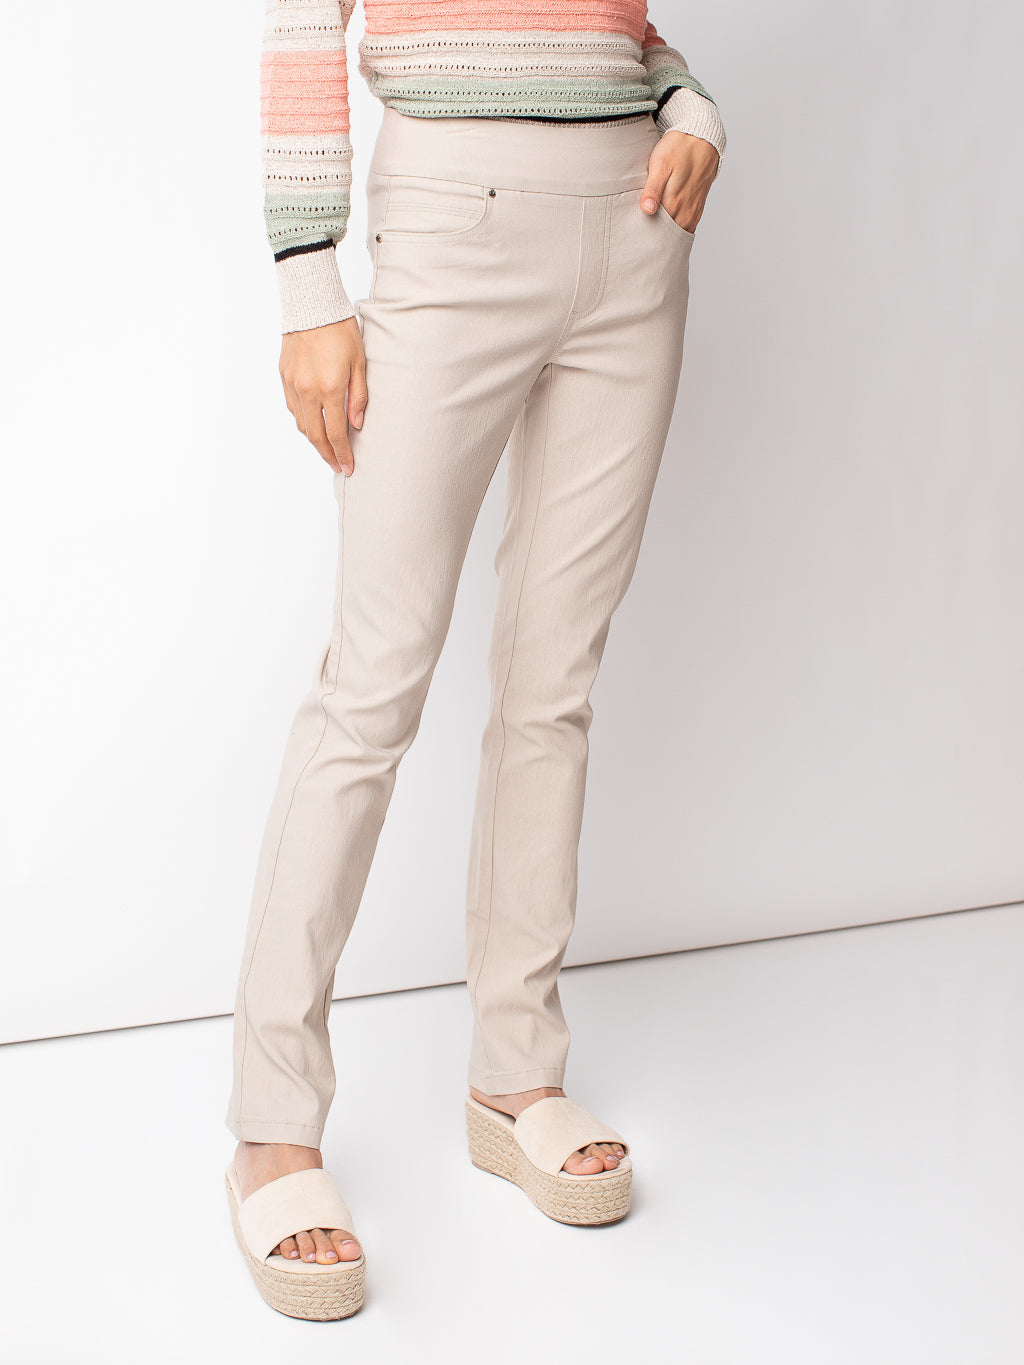 Fitted casual pull-on pant